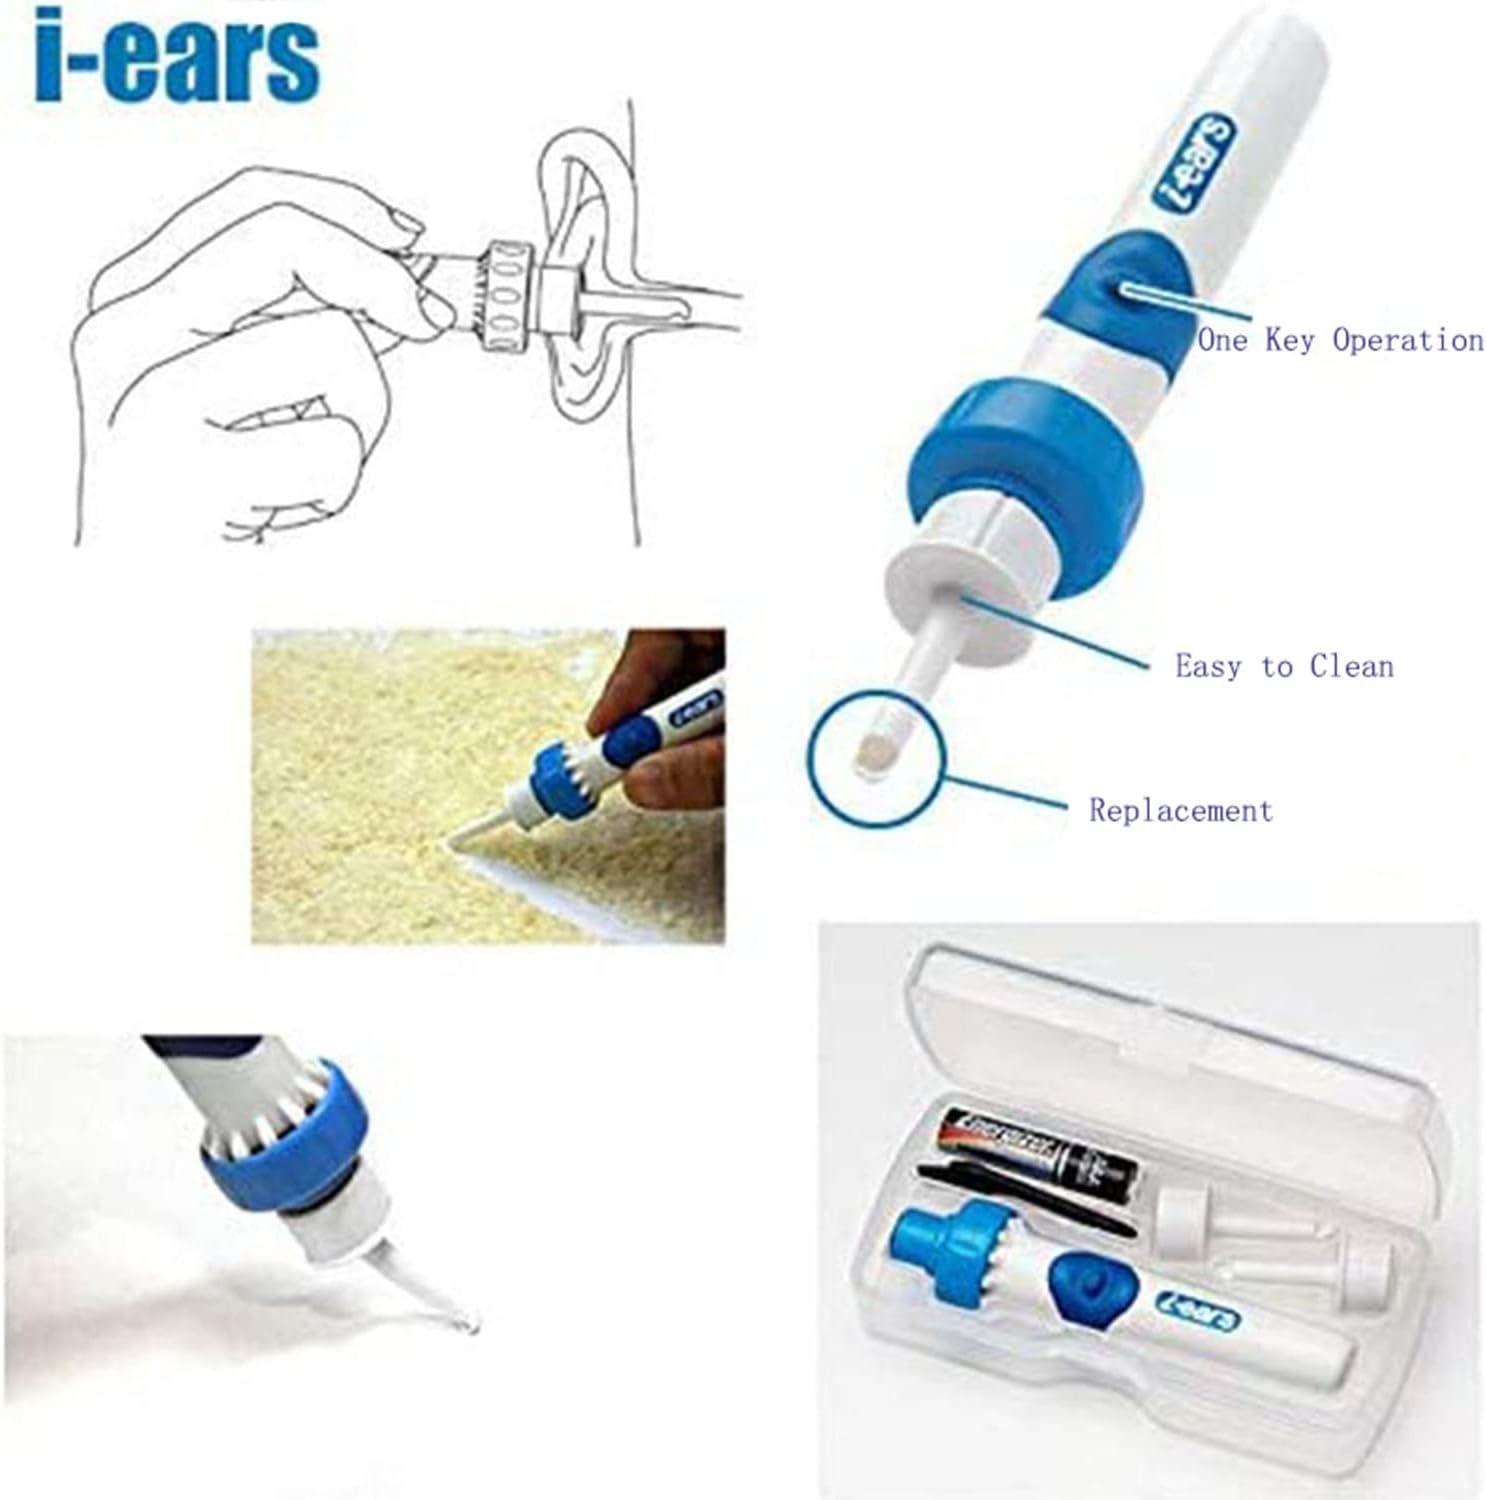 Electric Ear Suction Device,Portable Comfortable Efficient Automatic  Electric Vacuum Soft Ear Pick Ear Cleaner Easy Earwax Remover Soft Prevent